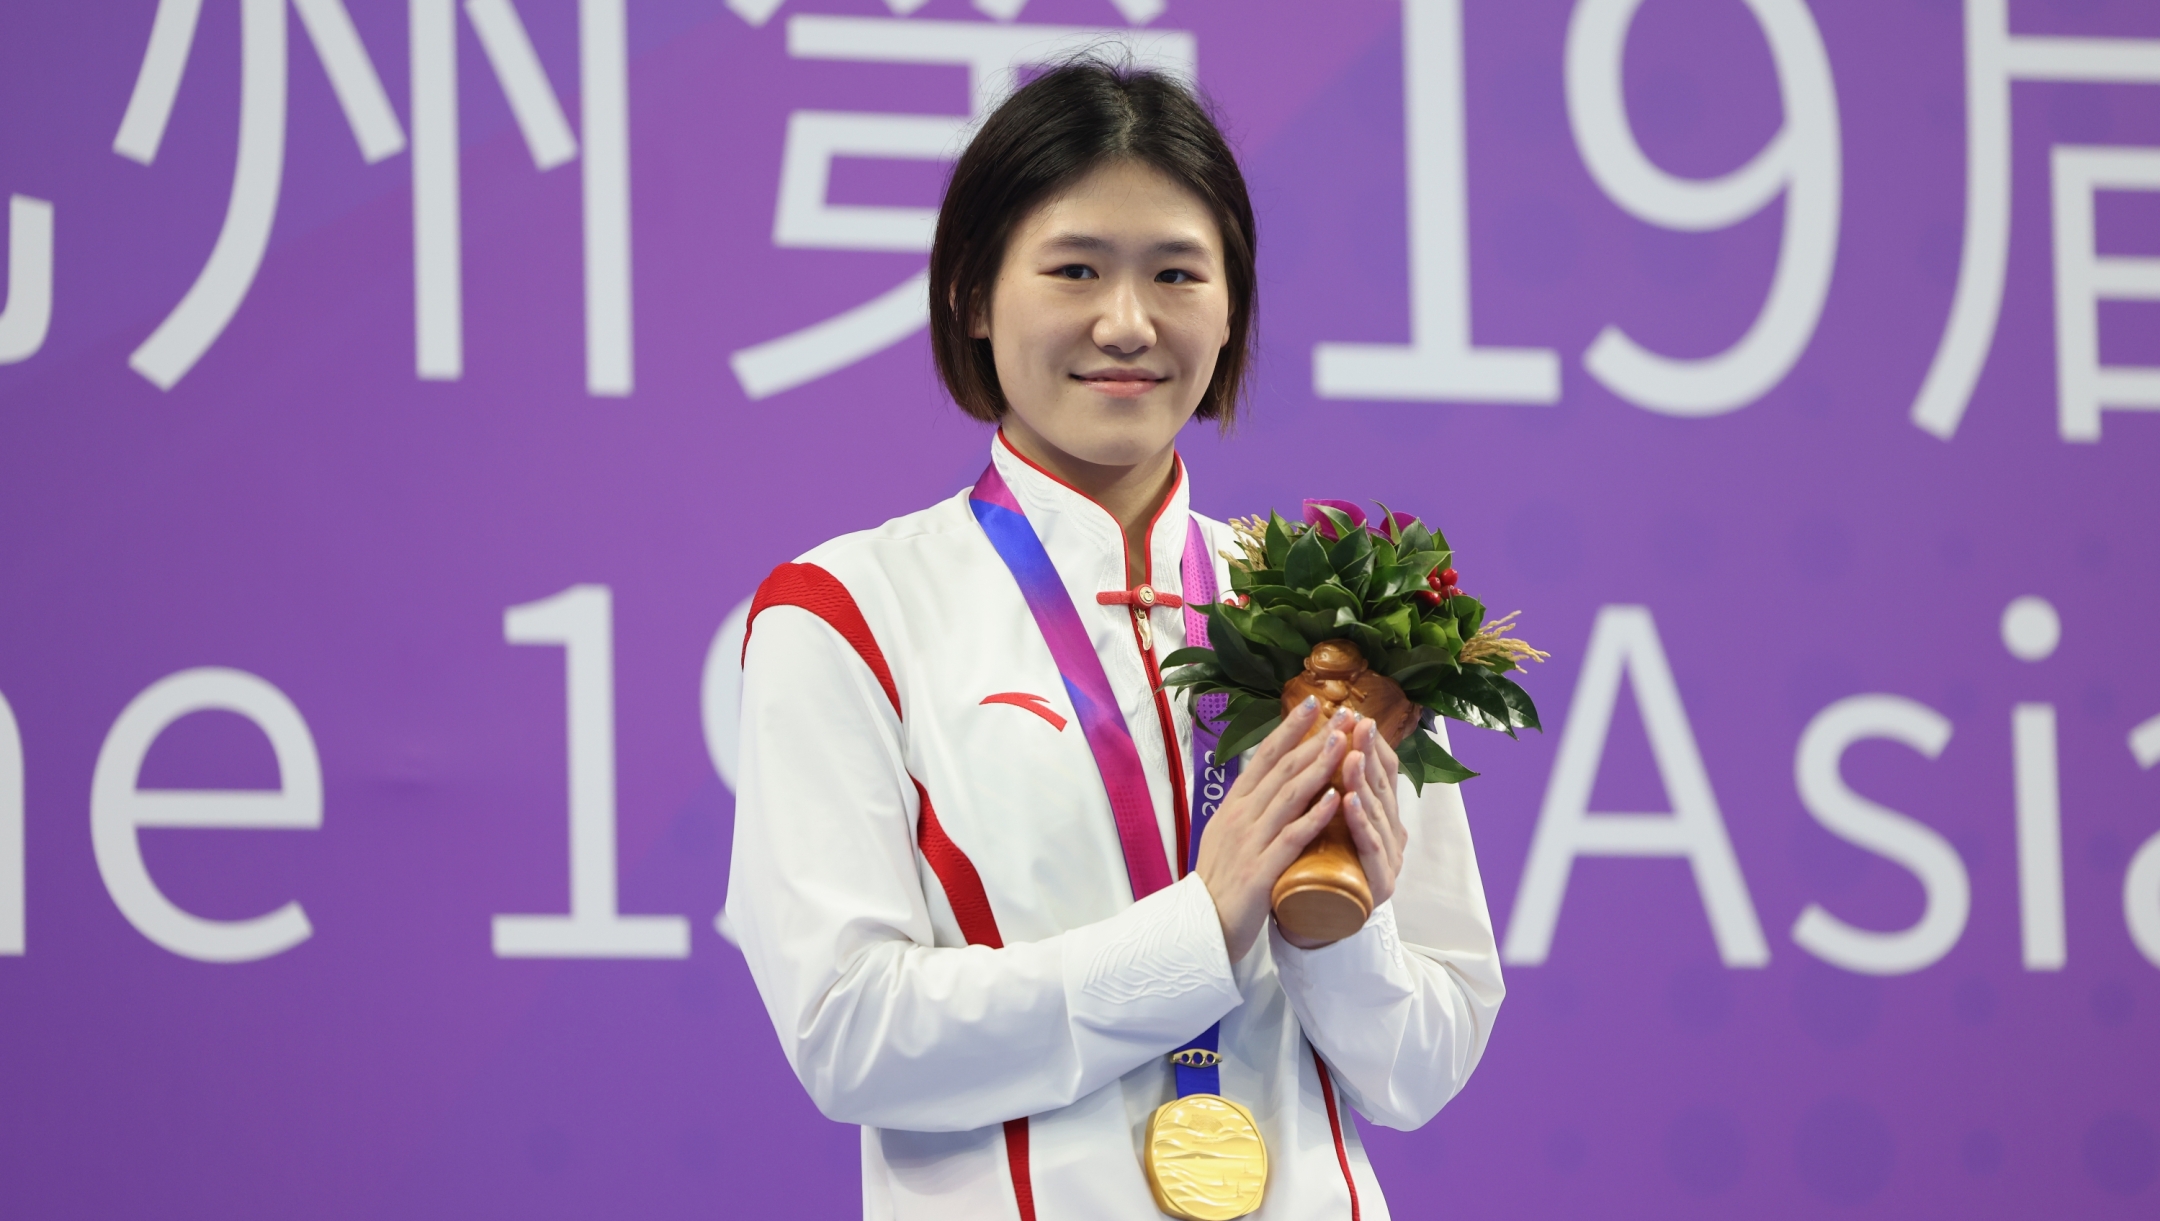 HANGZHOU, CHINA - SEPTEMBER 28: Gold medallist Ye Shiwen of China celebrates during the medals ceremony for the women's 200m breaststroke swimming event during the Hangzhou 2022 Asian Games on September 28, 2023 in Hangzhou, China. (Photo by Lintao Zhang/Getty Images)